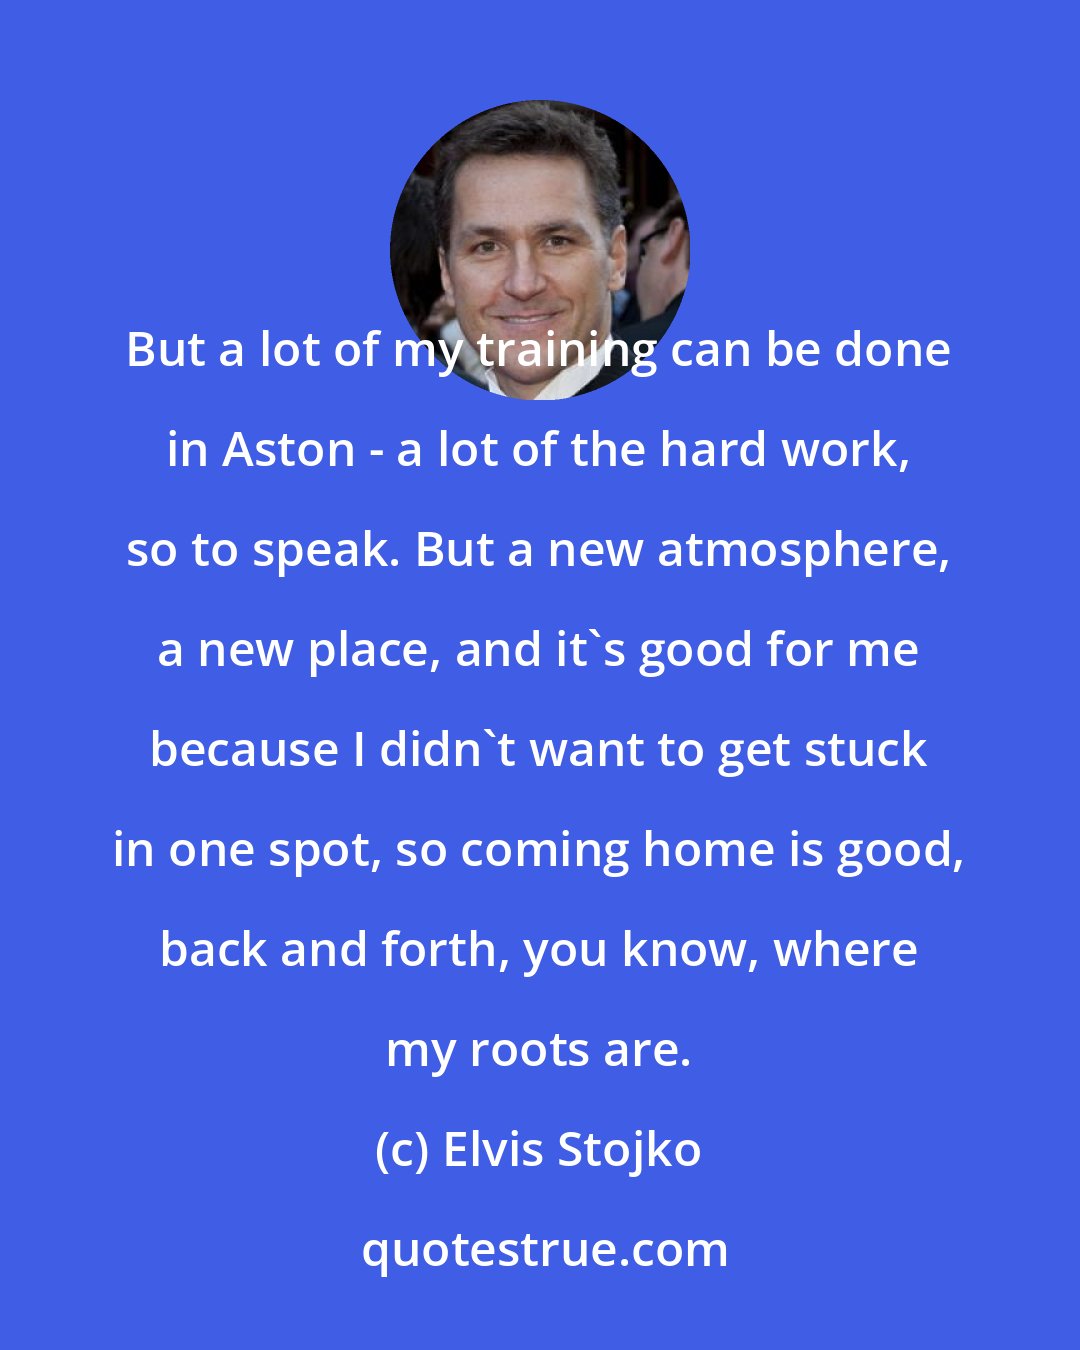 Elvis Stojko: But a lot of my training can be done in Aston - a lot of the hard work, so to speak. But a new atmosphere, a new place, and it's good for me because I didn't want to get stuck in one spot, so coming home is good, back and forth, you know, where my roots are.